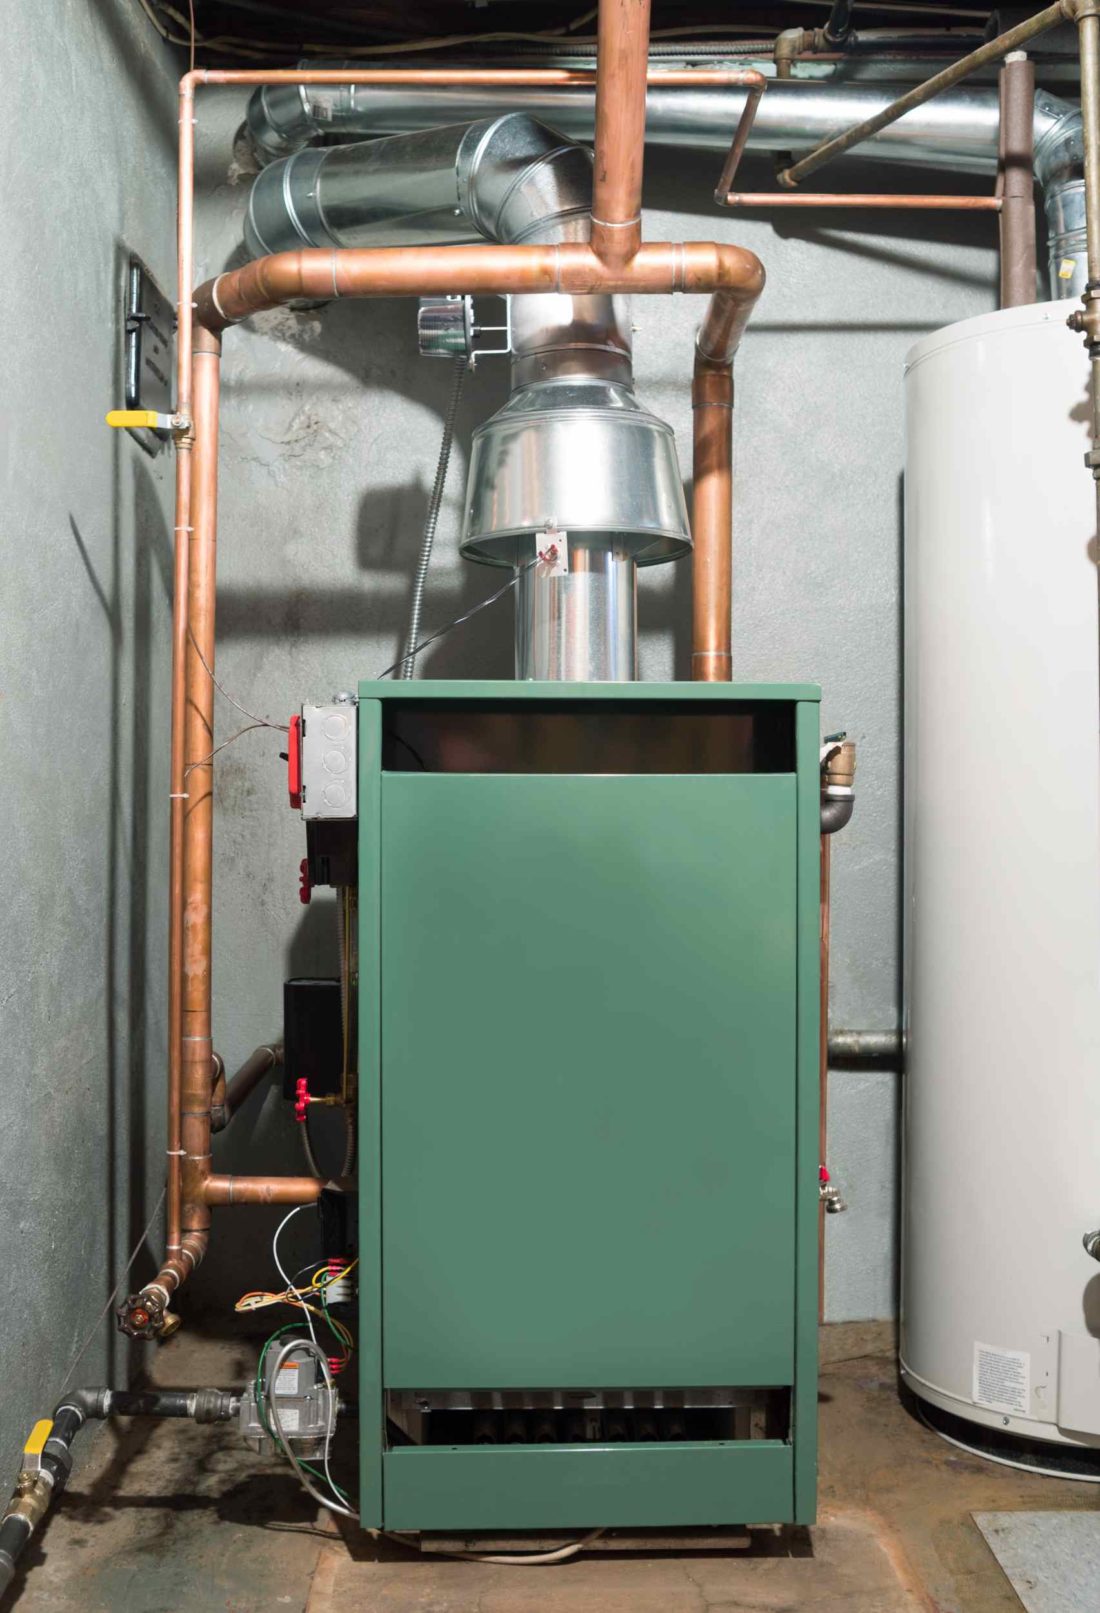 Safeguarding Your Home The Importance of Proper Furnace Maintenance